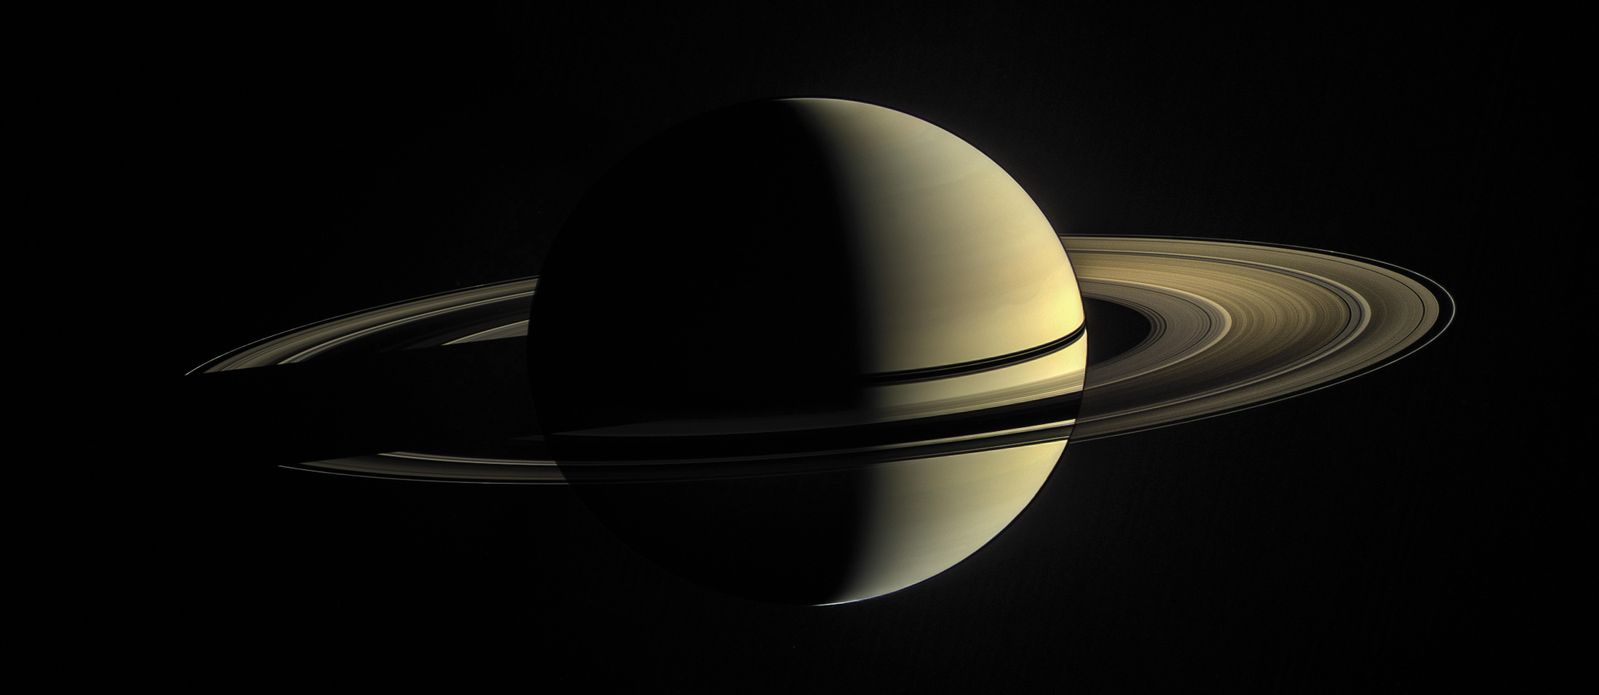 saturn could lose its rings in less than 100 million years science smithsonian magazine